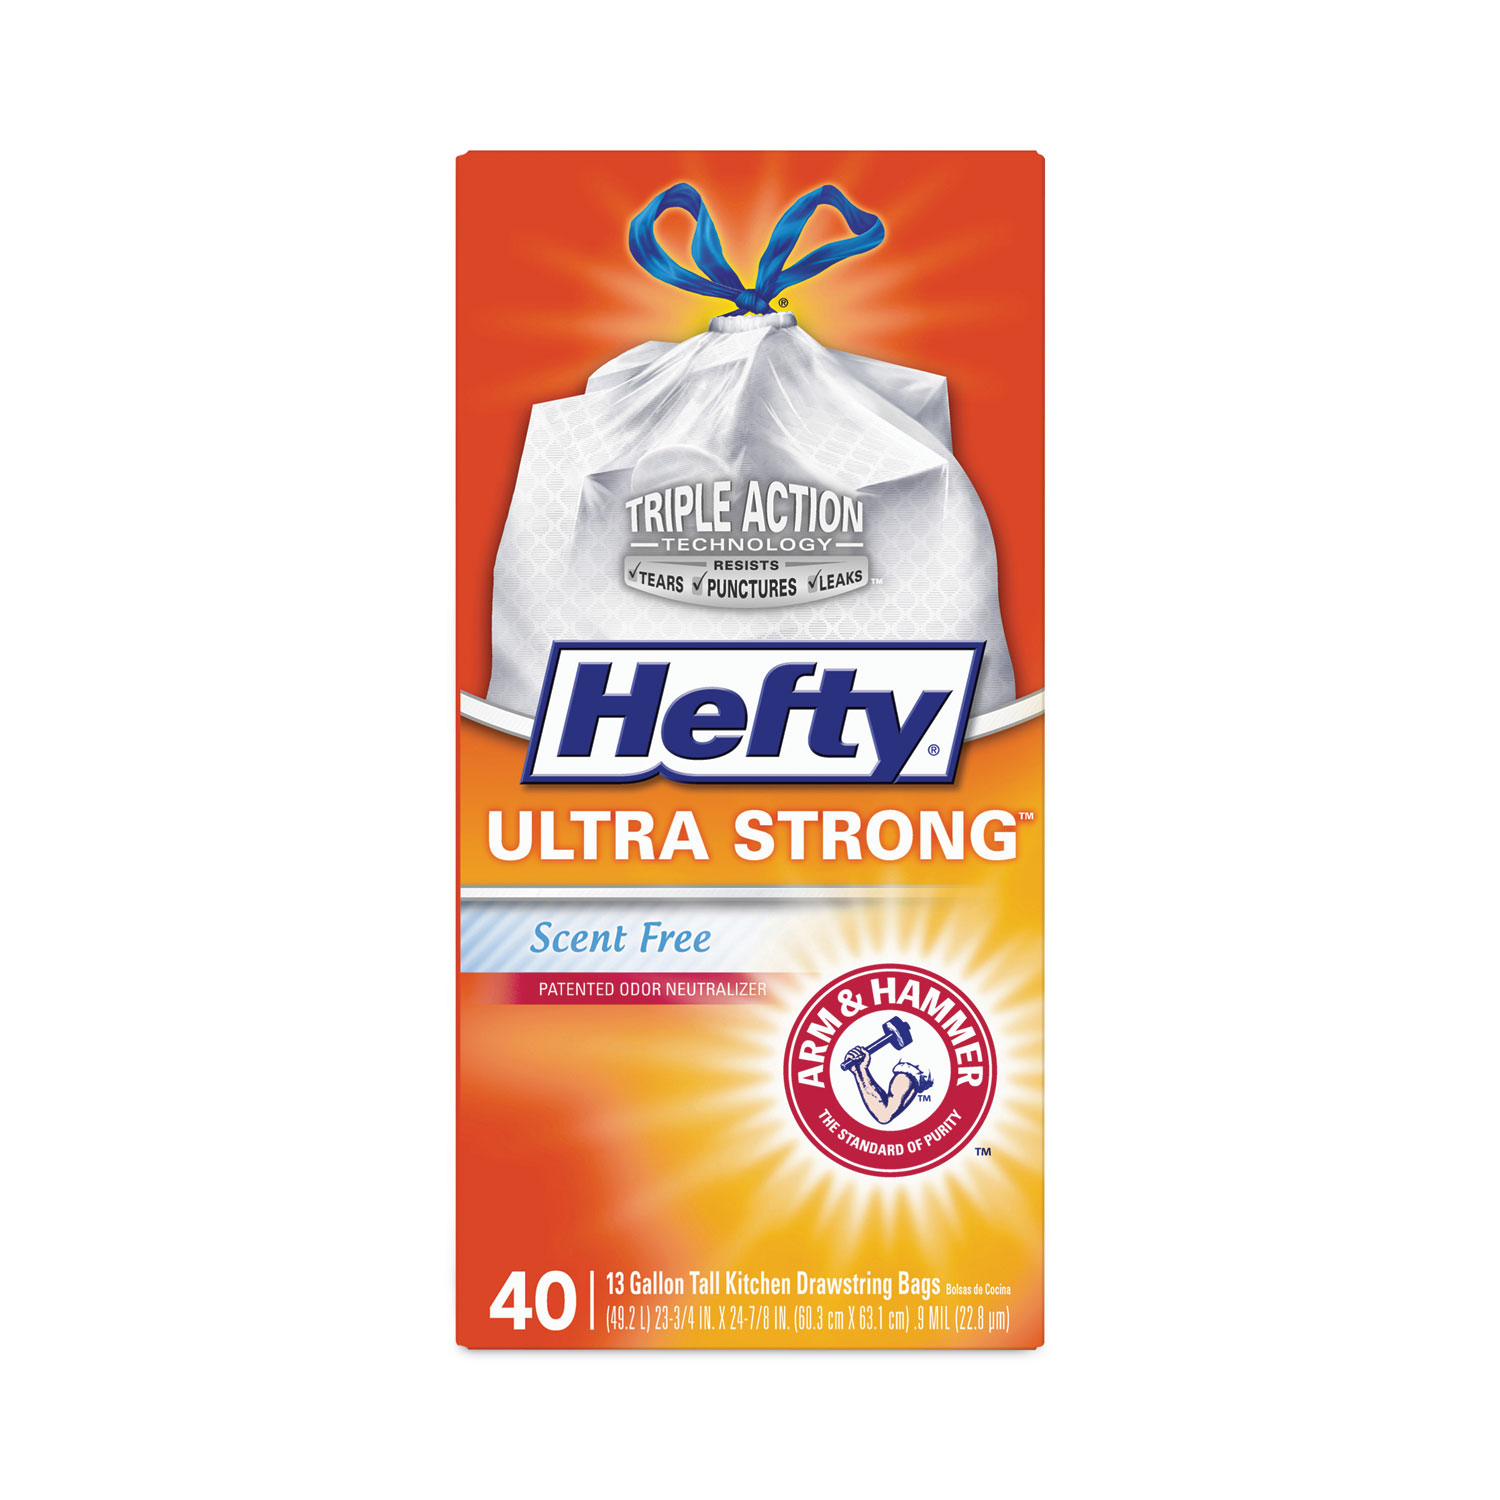 Hefty Ultra Strong 13 Gallon Scented Kitchen Trash Bag 23.75 x